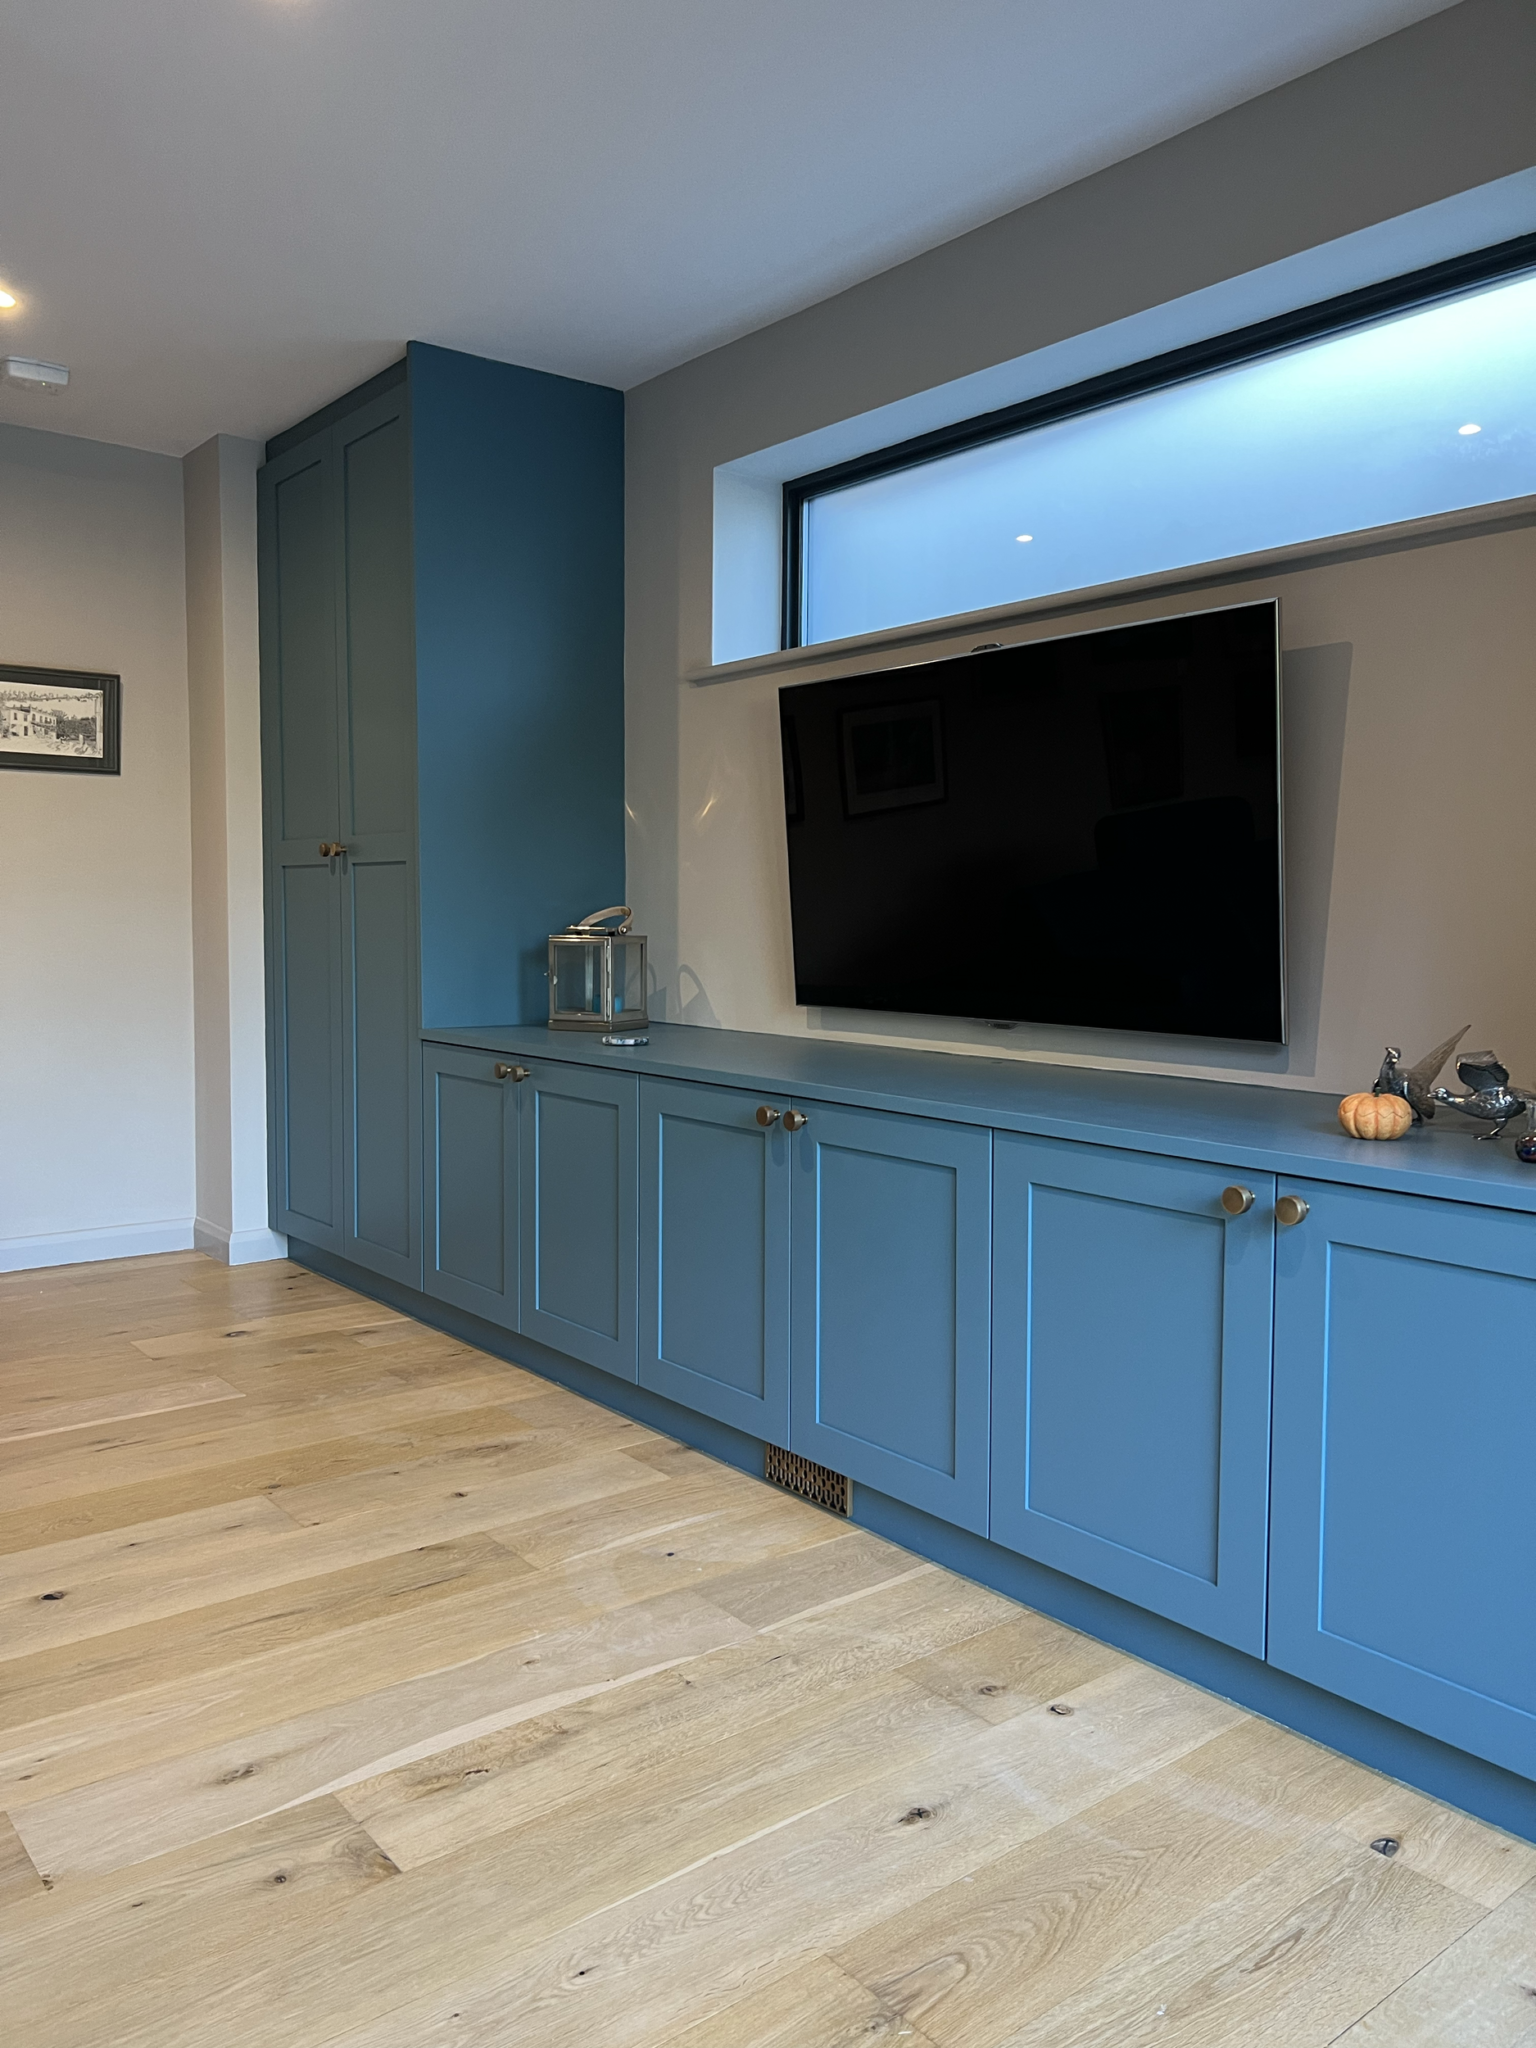 Large media wall - built-in cupboards and tv unit